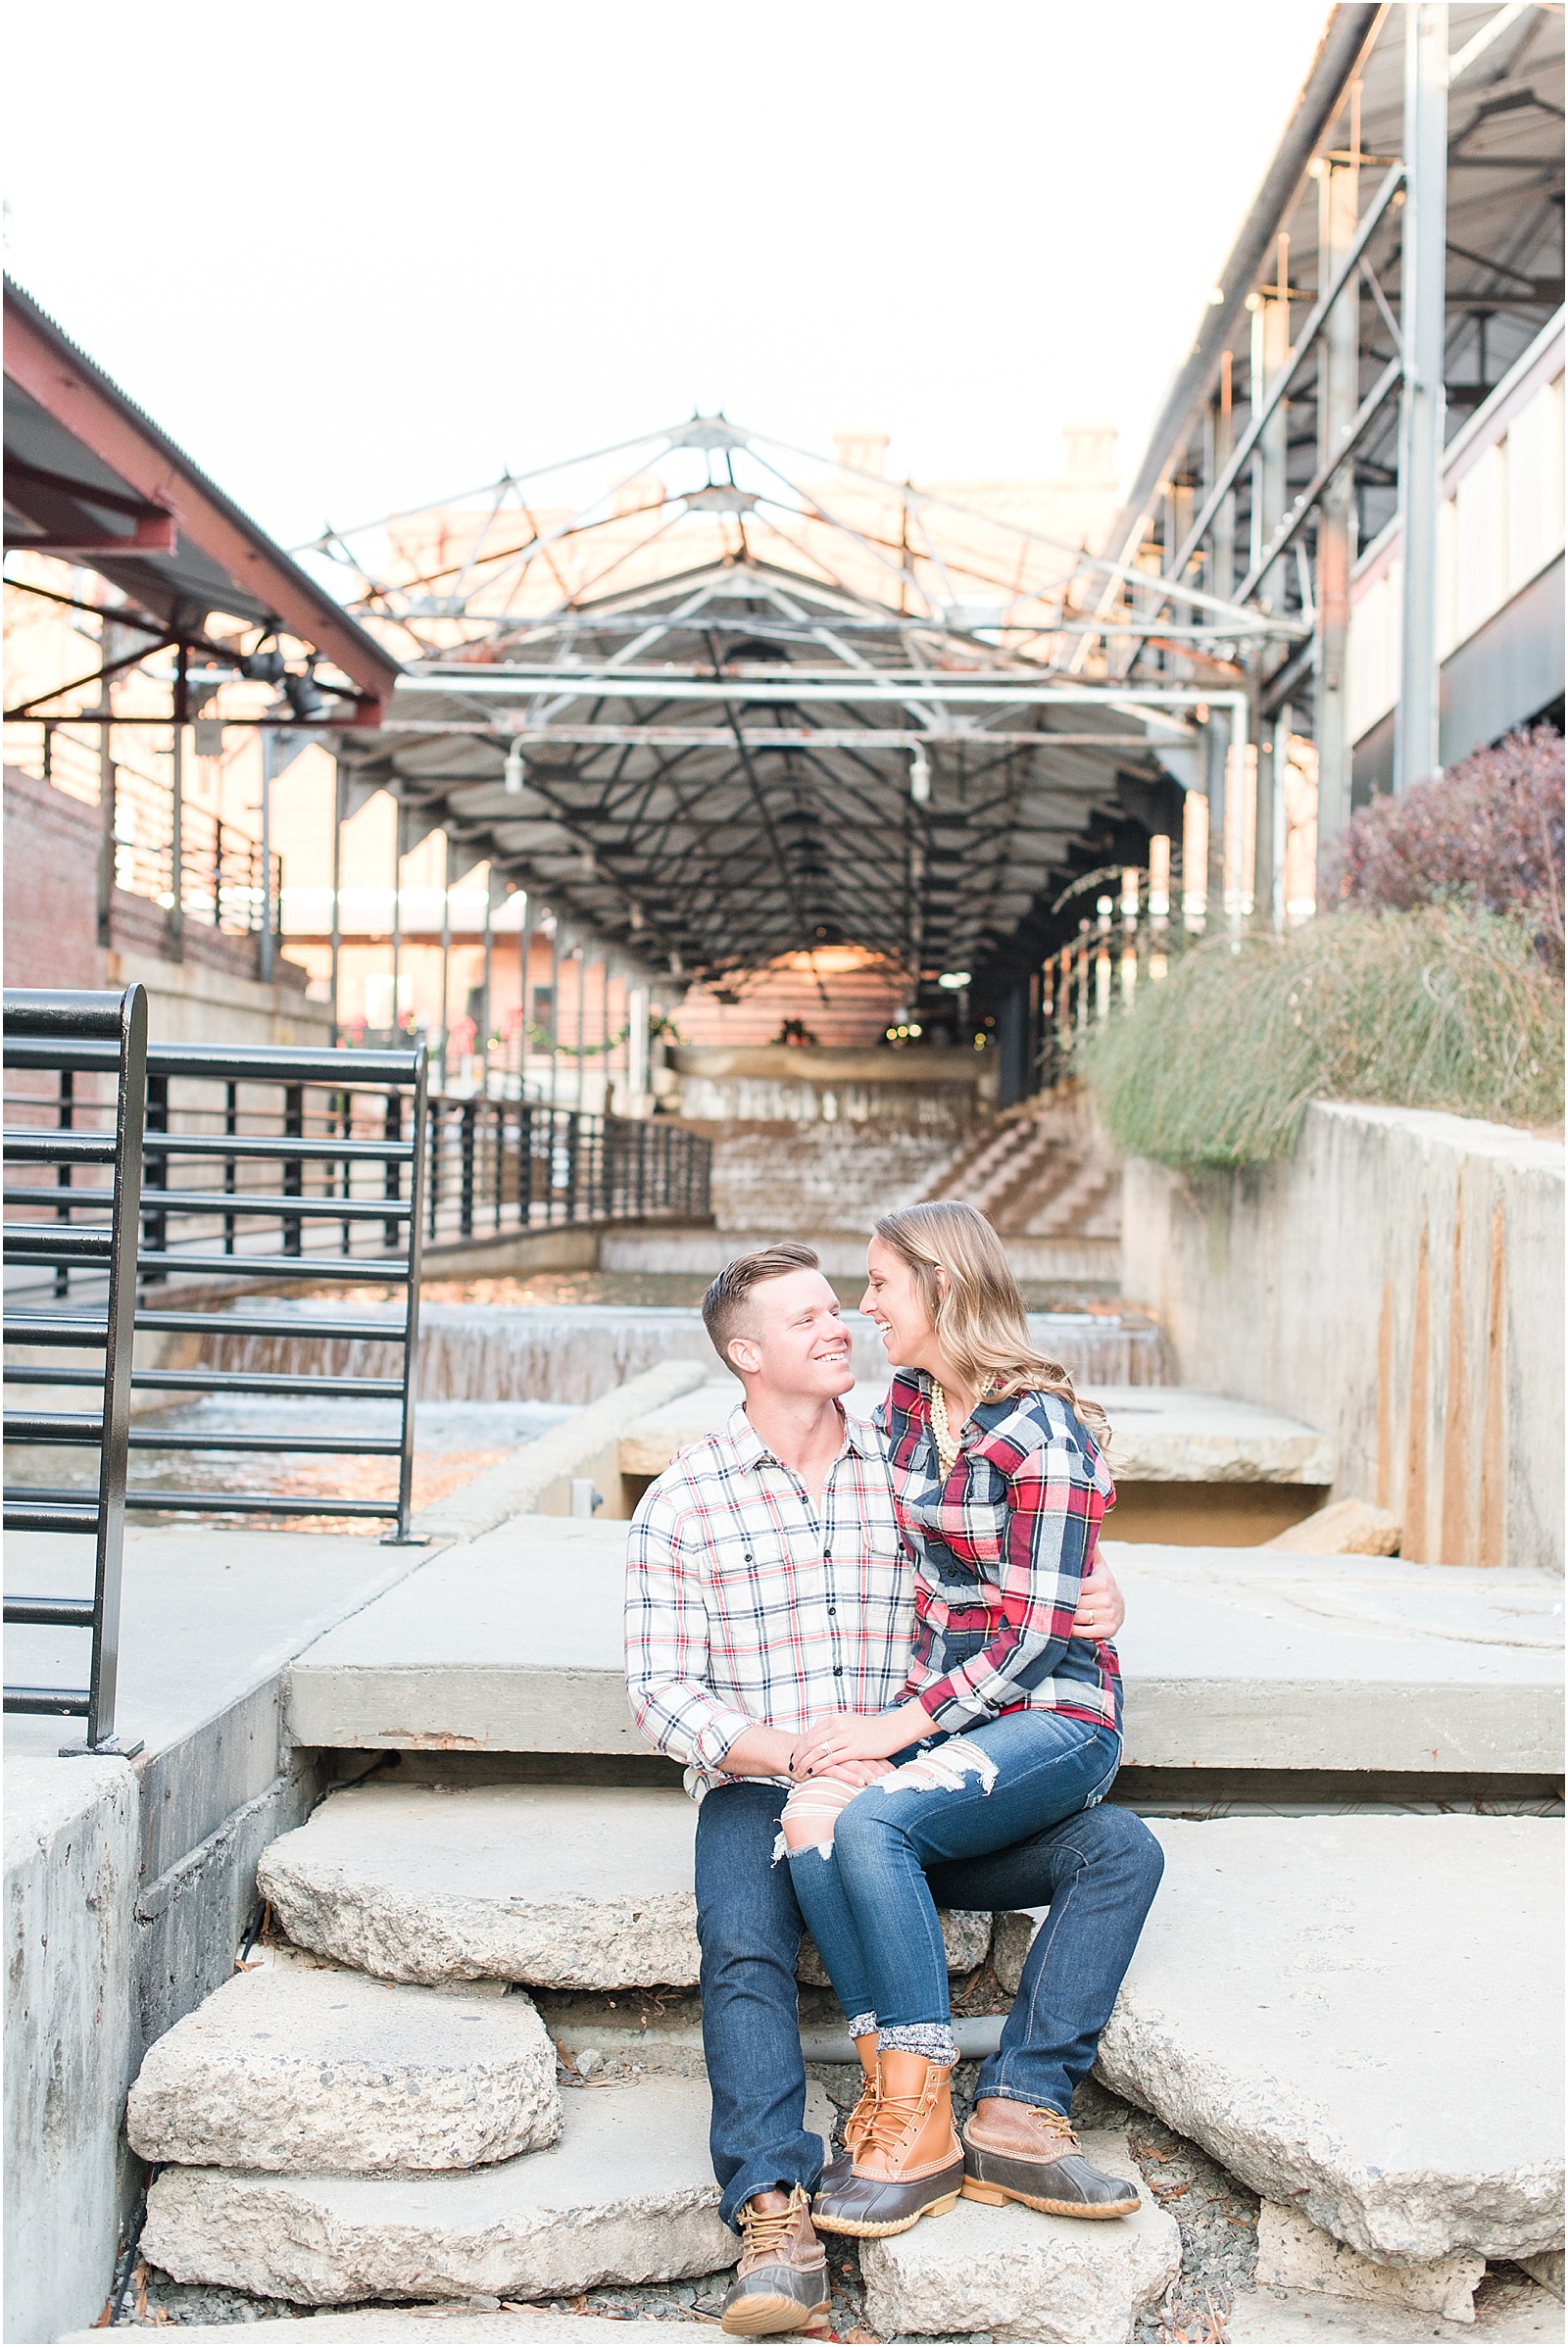 Michelle & Sara Photography, American Tabacco factory, American Tabacco Factory Portrait Session, Michelle & Sara Photography Portrait Session, rugged industrial chic photograph of couple sitting with LL Bean Boots